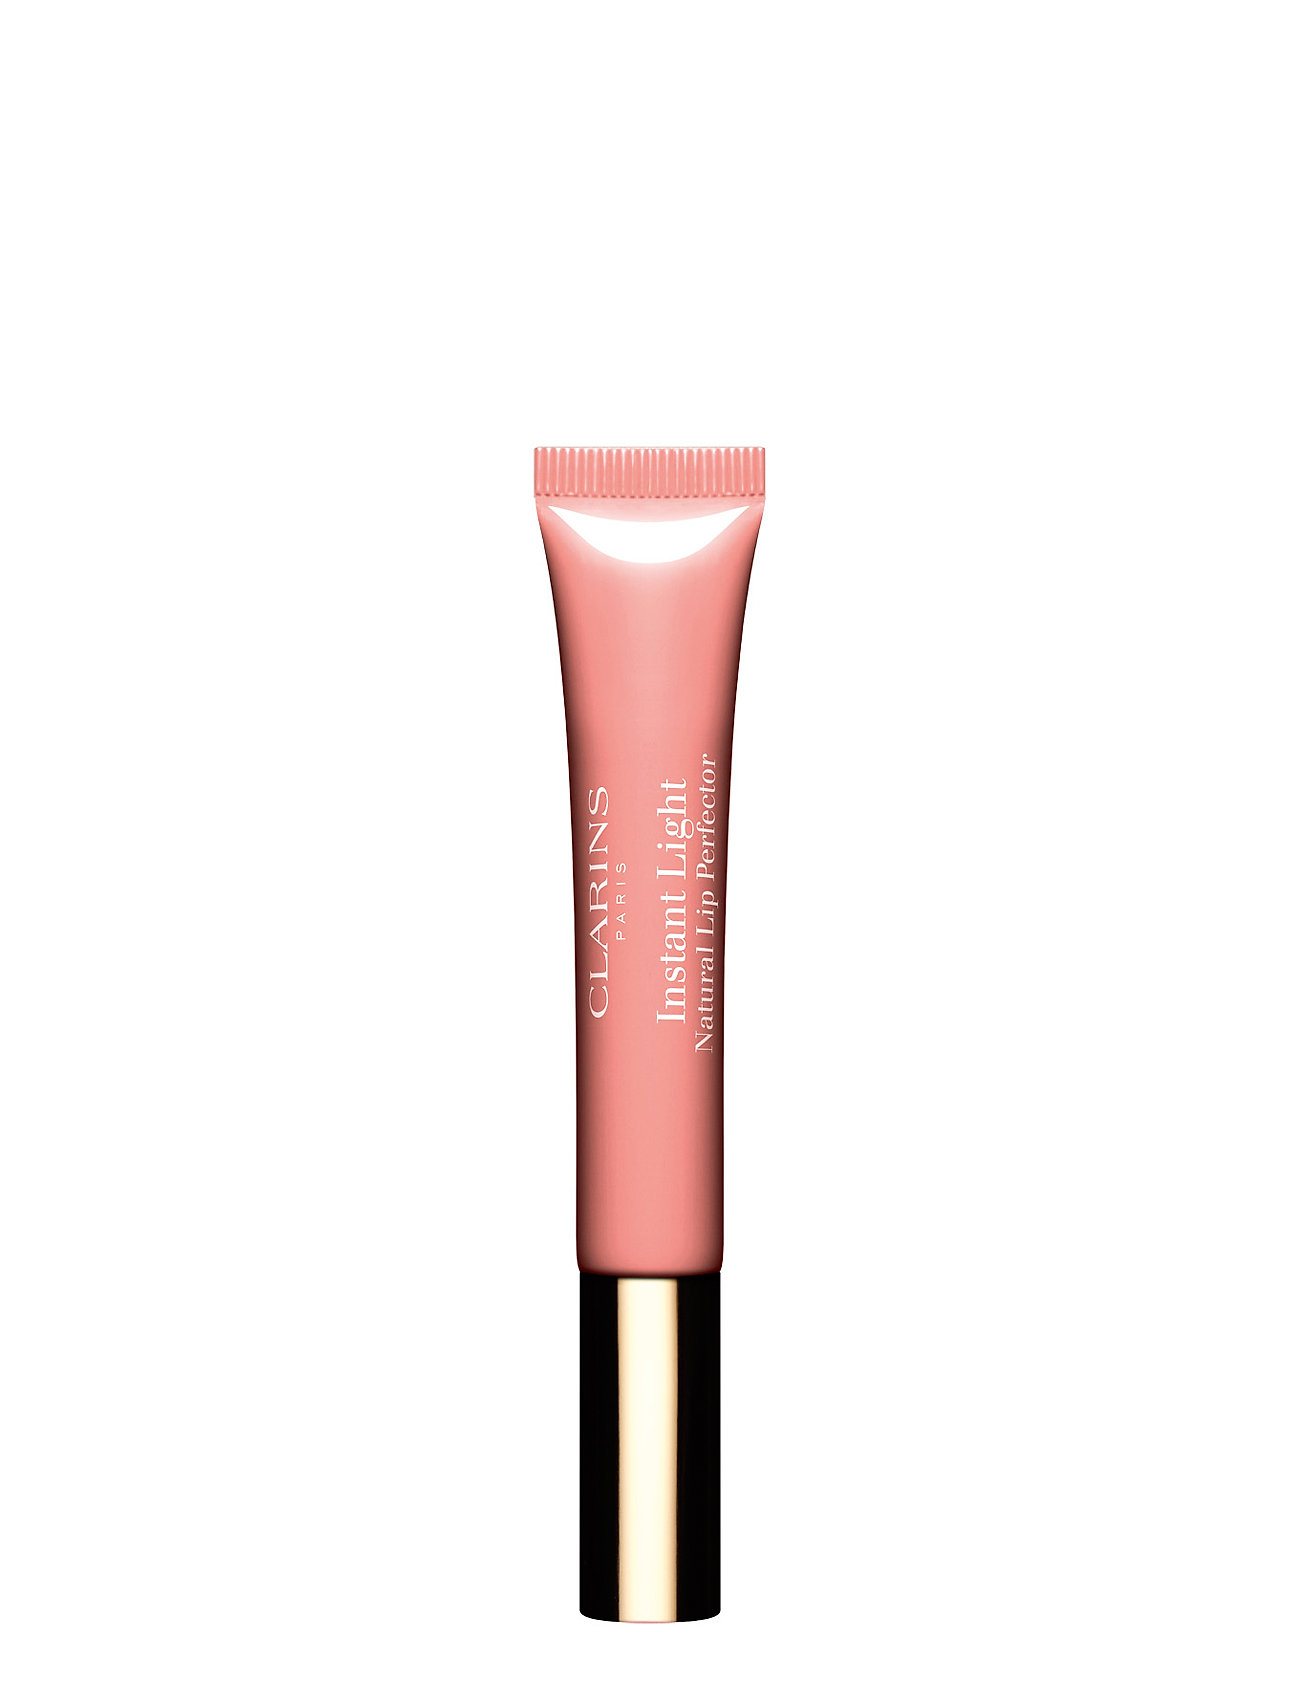 Instant Light Lip Perfector02 Apricot Shimmer Lipgloss Makeup Clarins